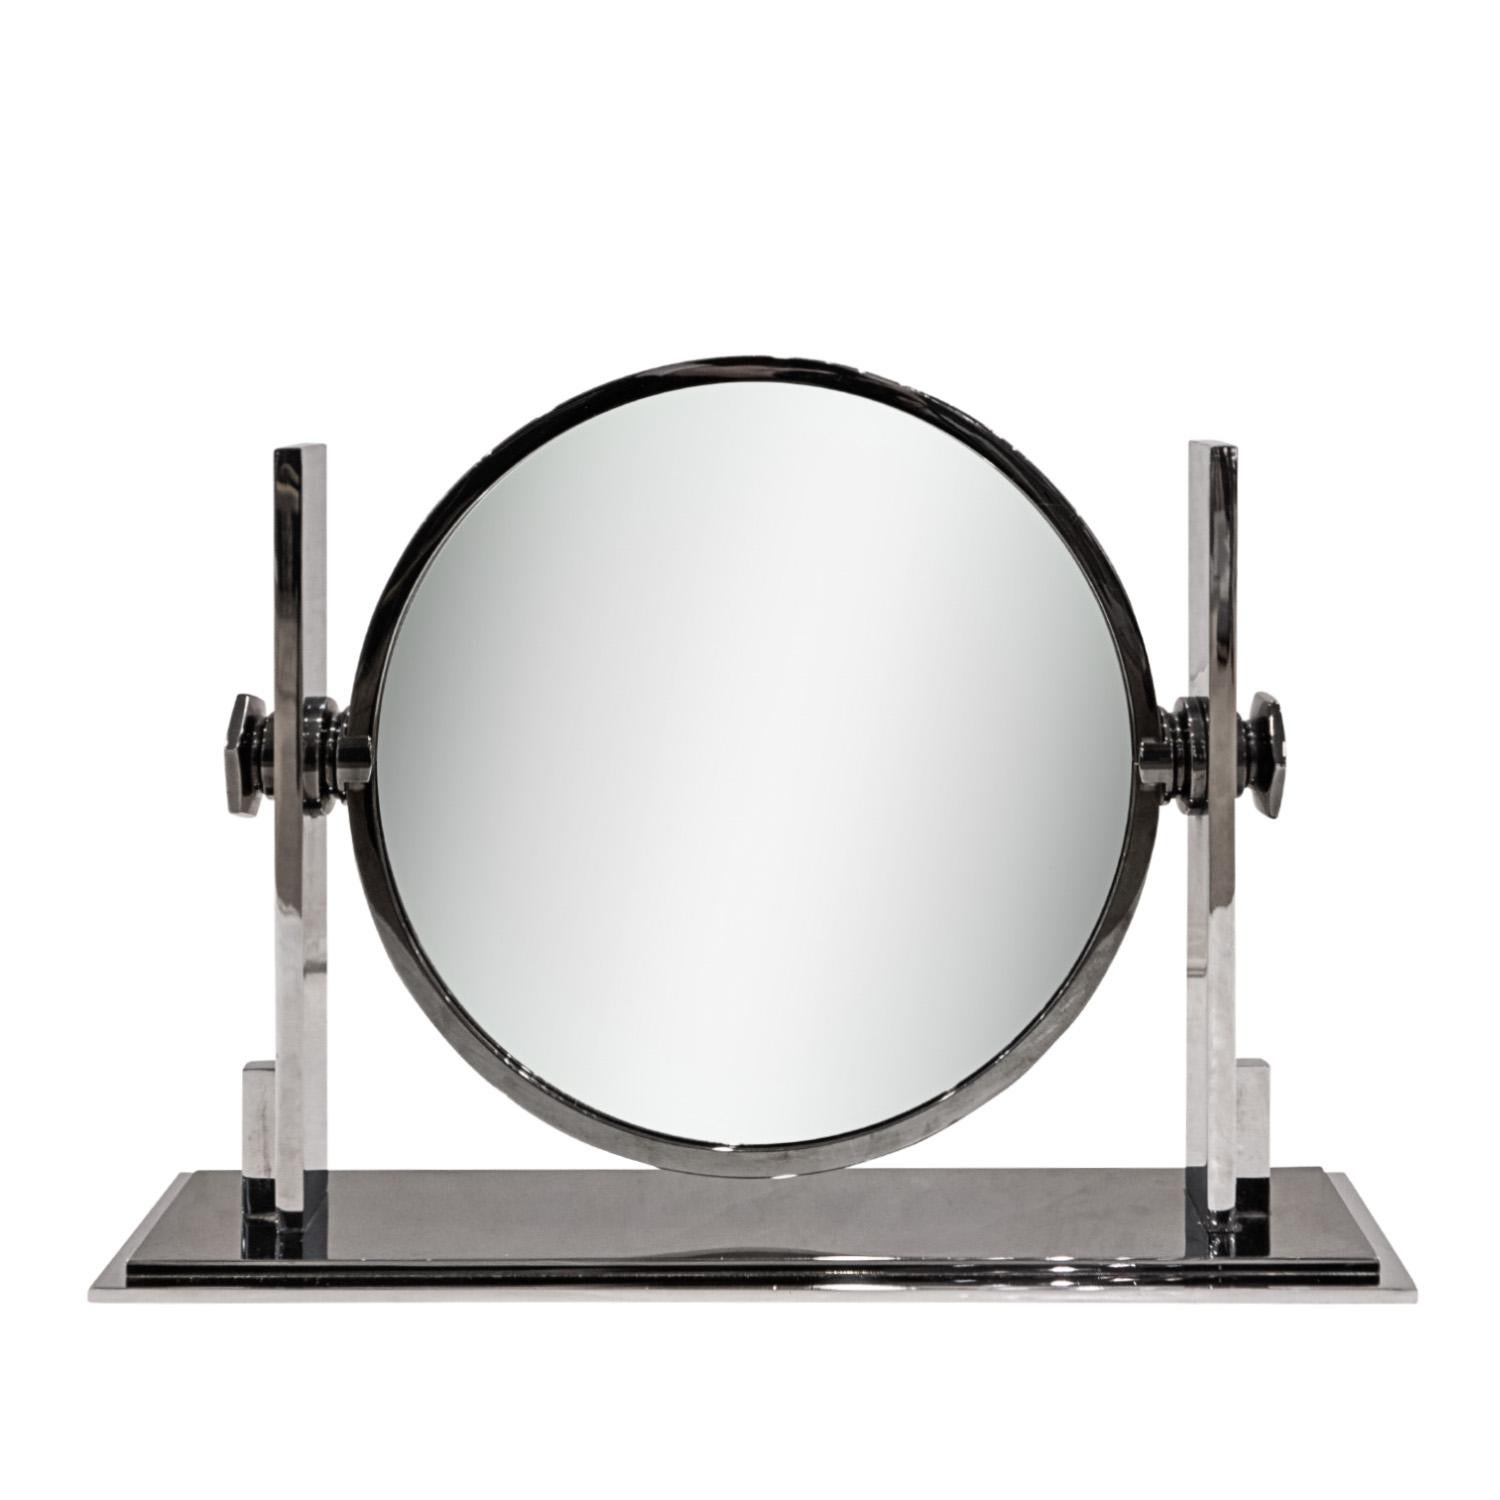 Beautifully crafted iconic double sided vanity mirror in polished gunmetal and chrome with magnifier on one side and regular mirror on the other by Karl Springer, American 1980's.  It is rare to see this mirror in these metals.  It was typically